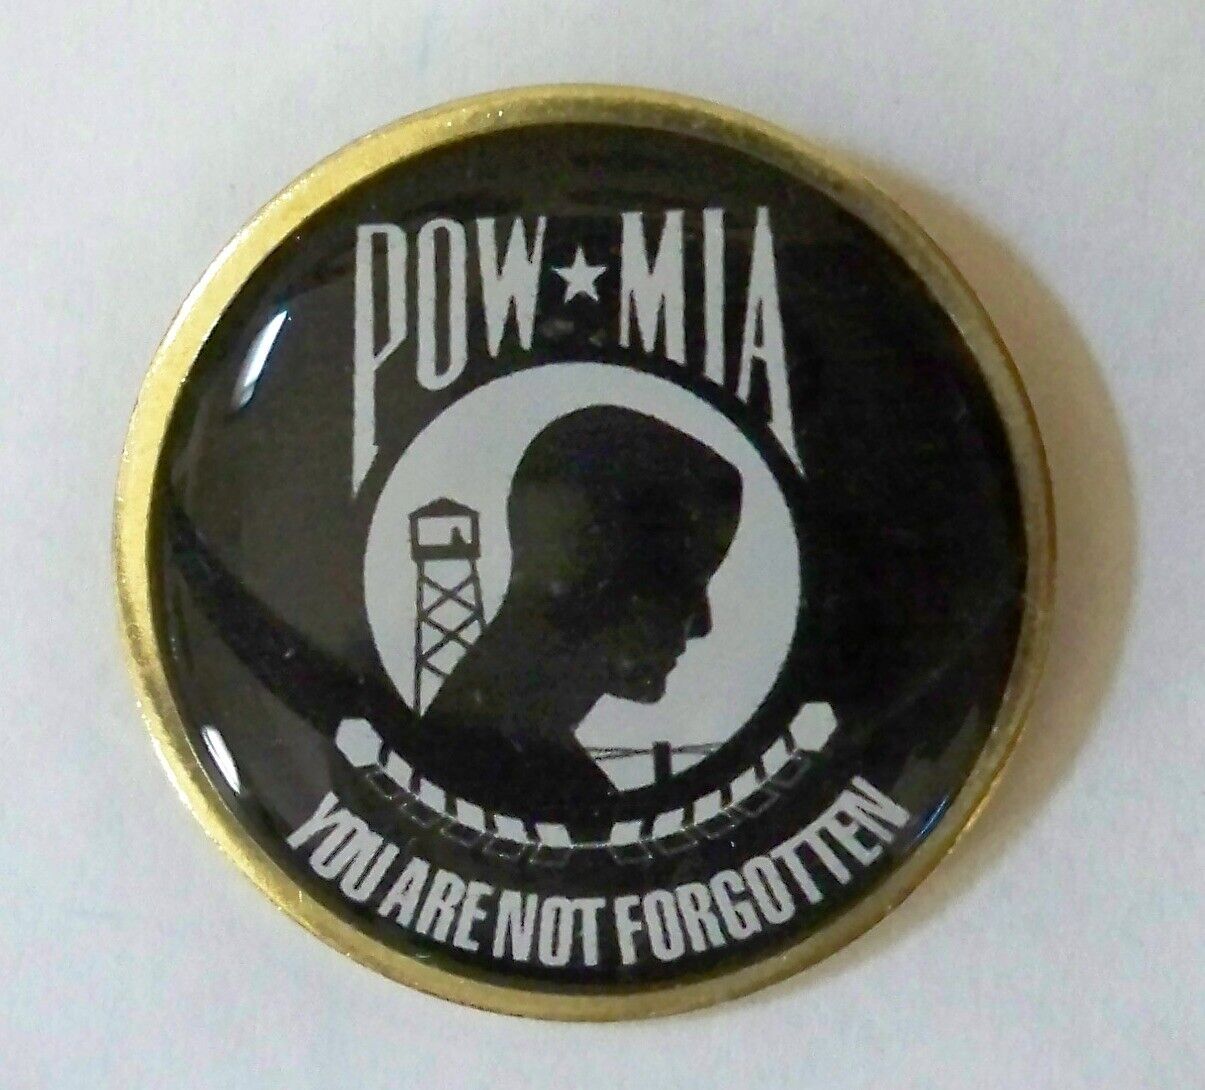 POW-MIA lapel pin, proudly made in the USA